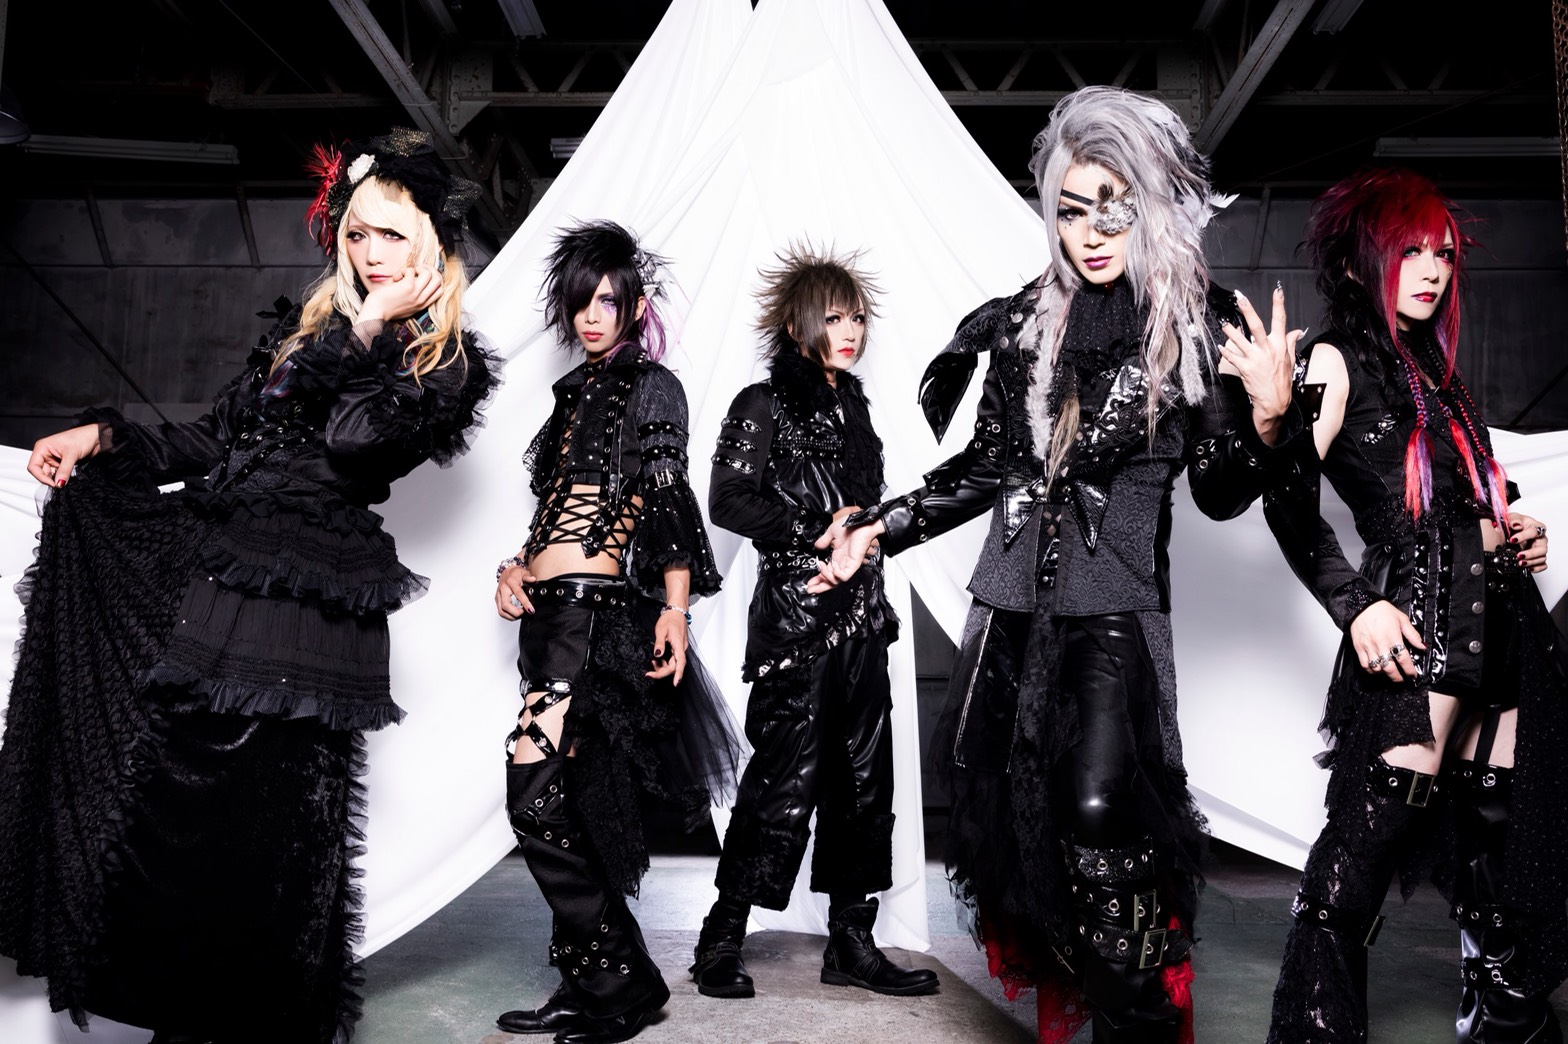 Starwave Records presents Scarlet Valse 無料ワンマンツアー名古屋編